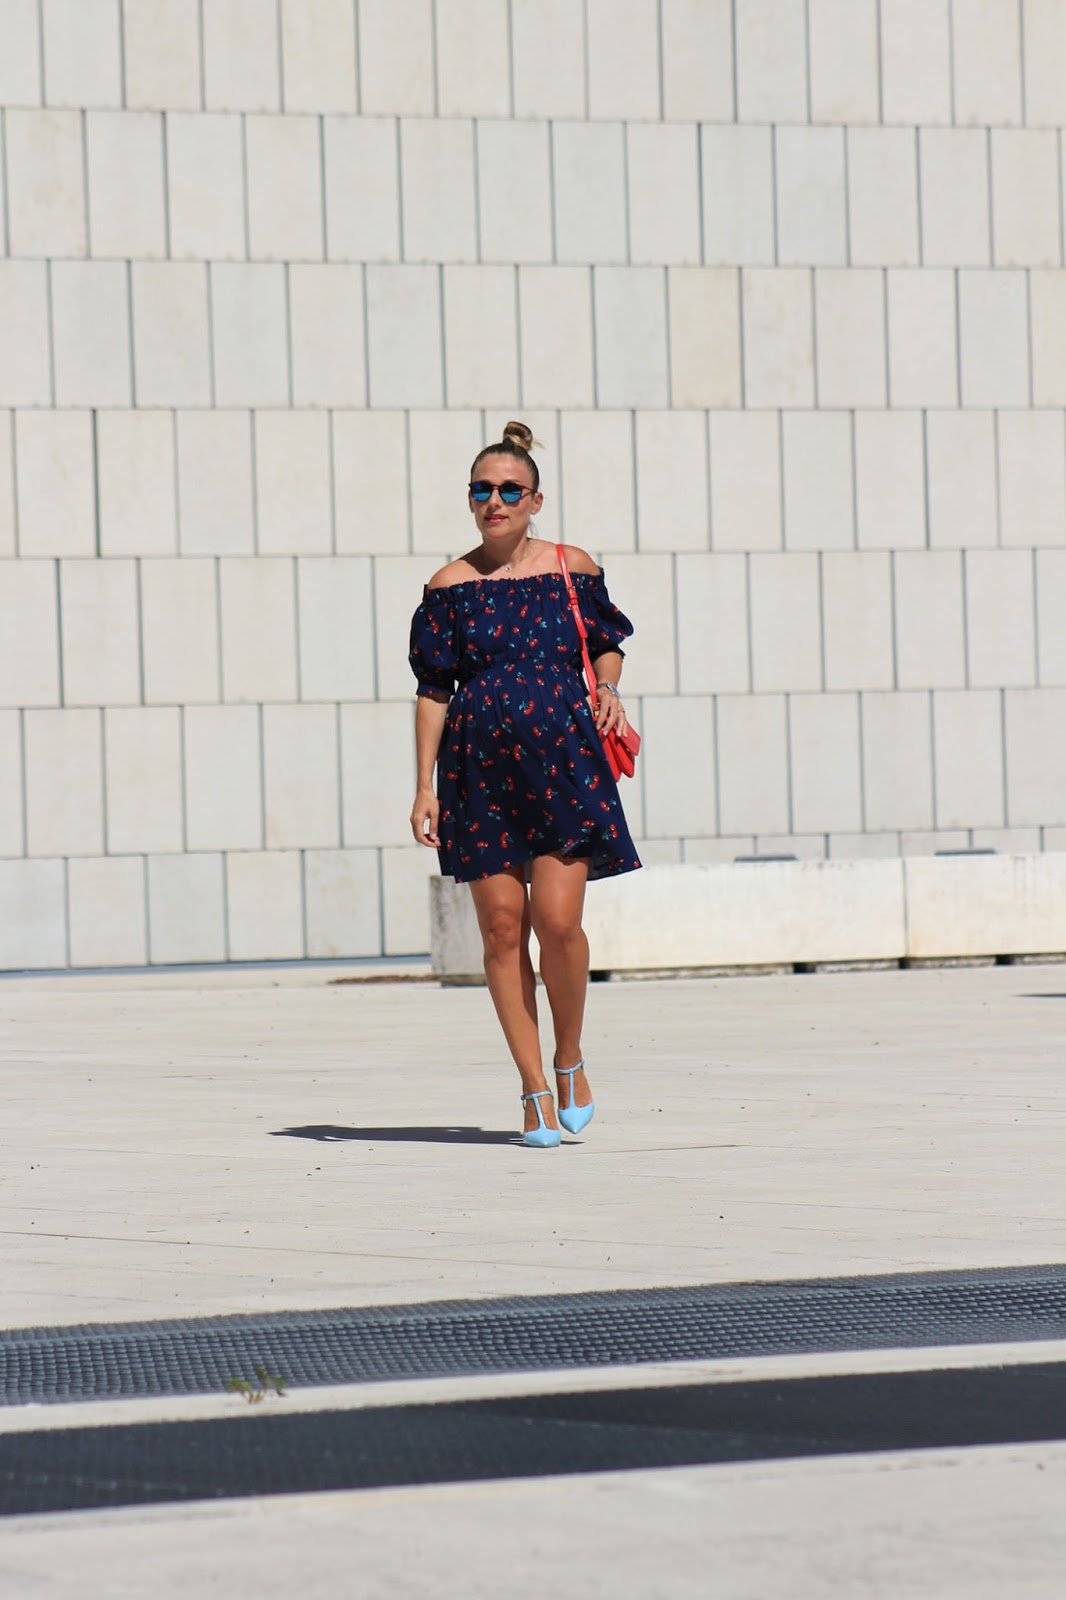 How to wear a cherry dress - Eniwhere Fashion - Rosegal